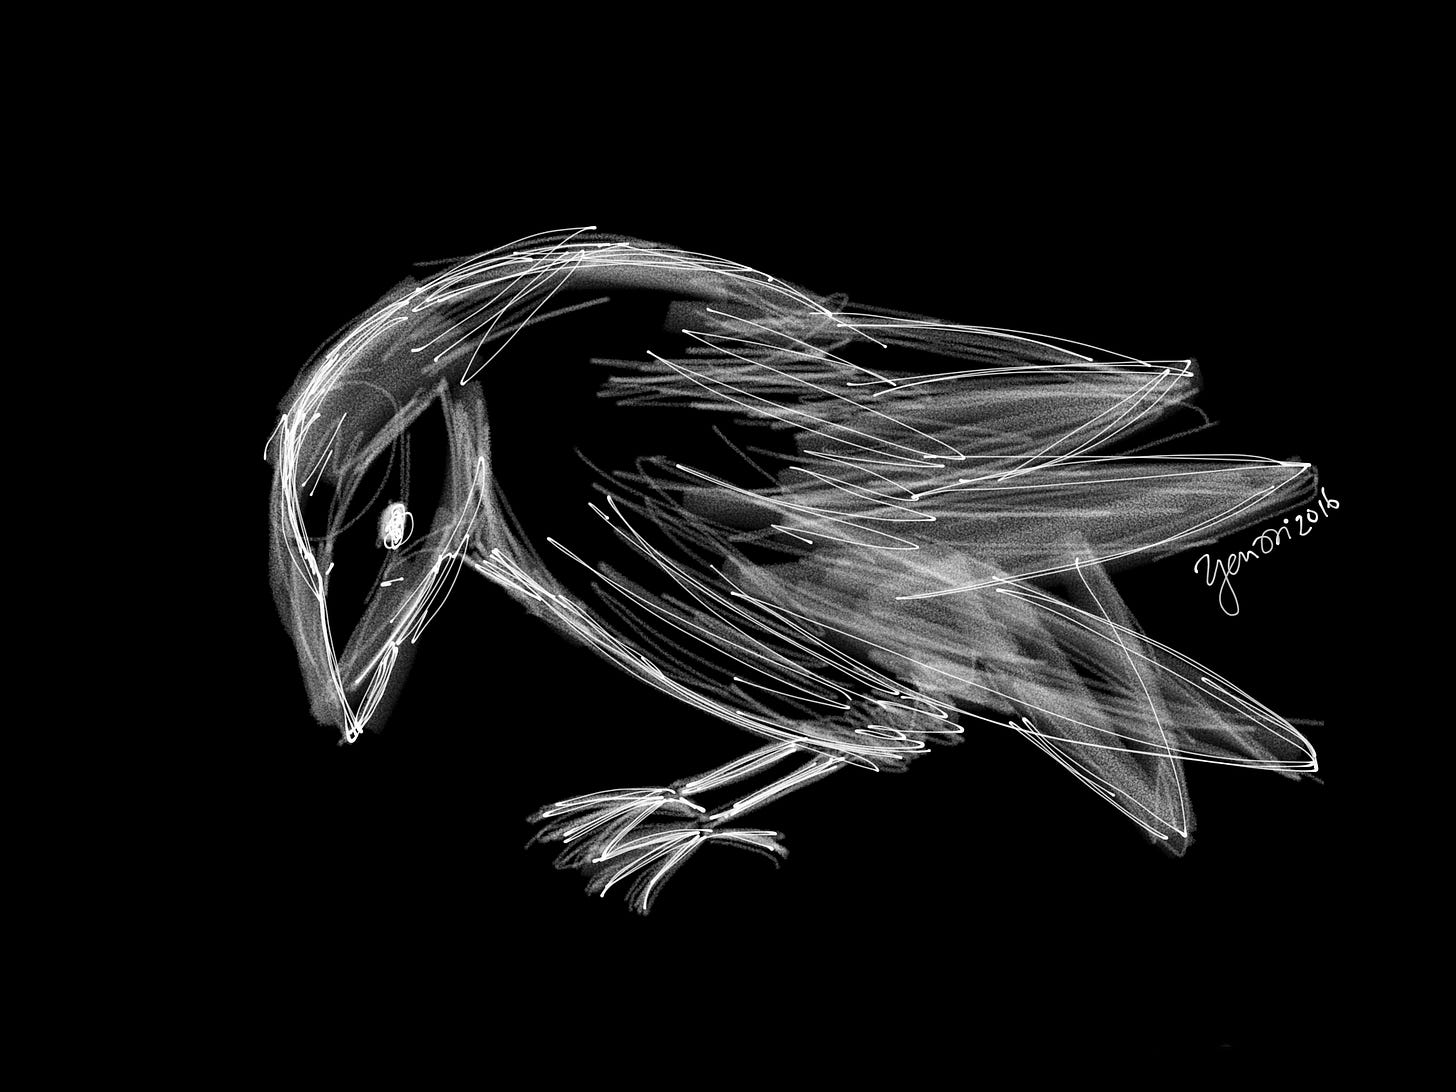 A picture of a crow drawn in white ink against a black background